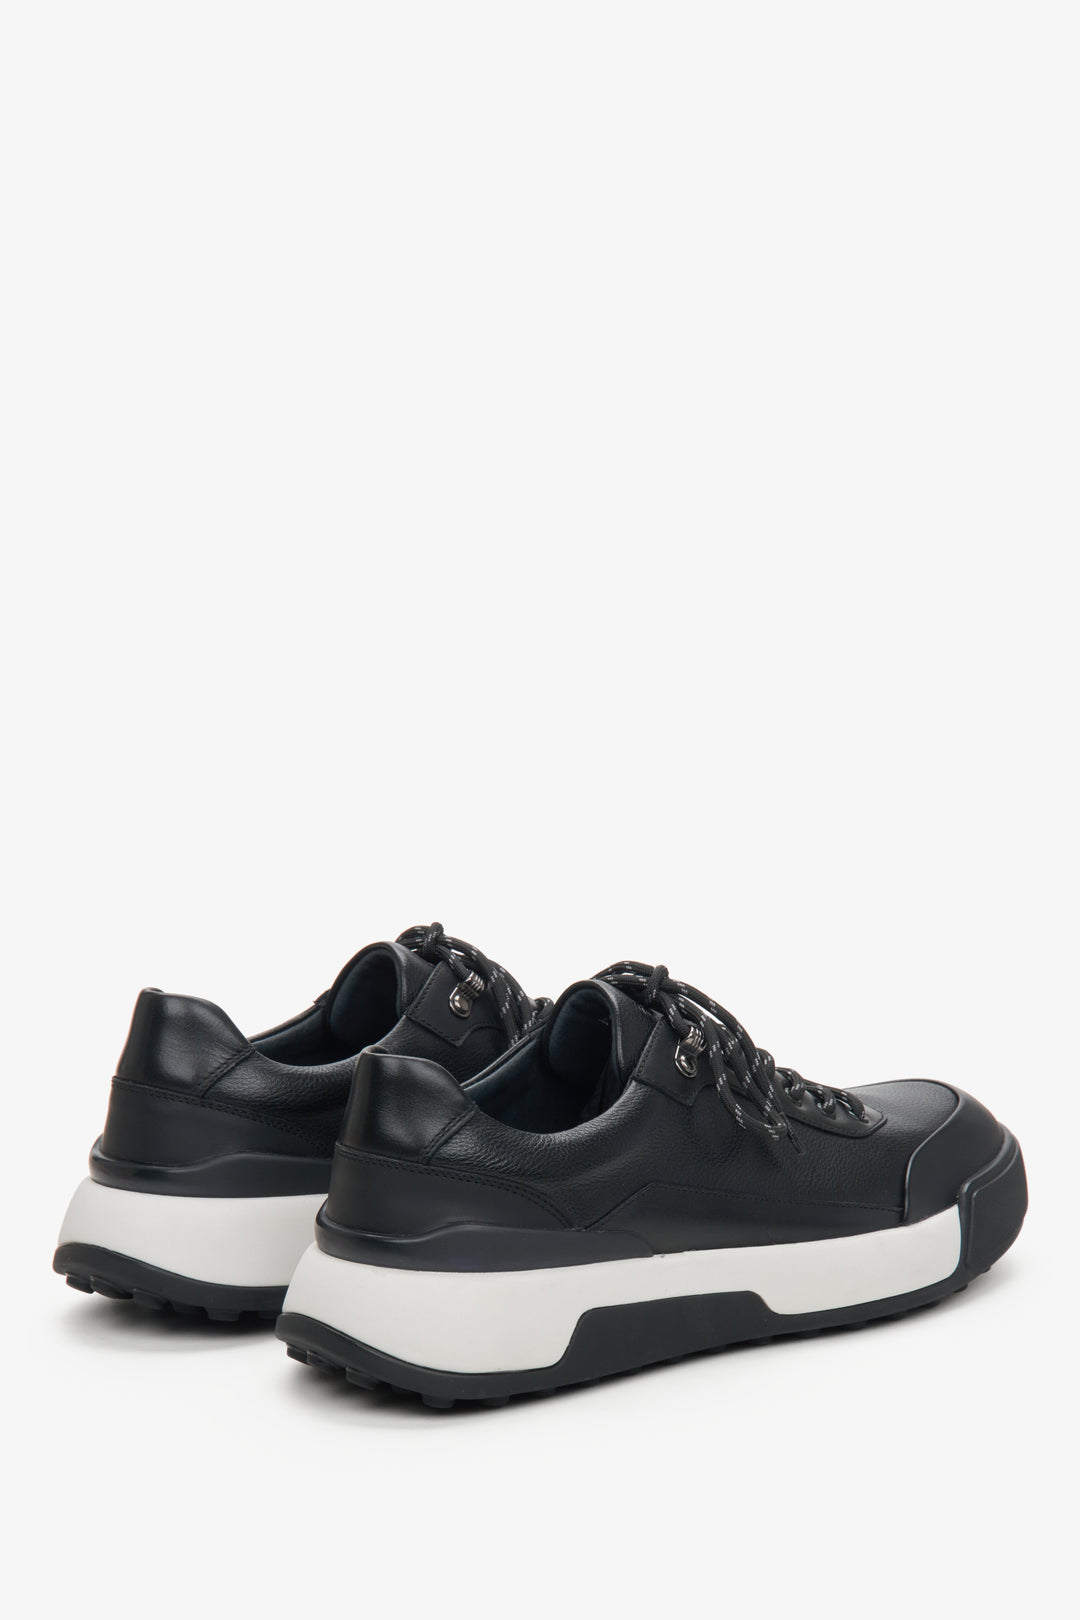 Men's black leather sneakers by Estro - close-up on the back and side line of the shoes.